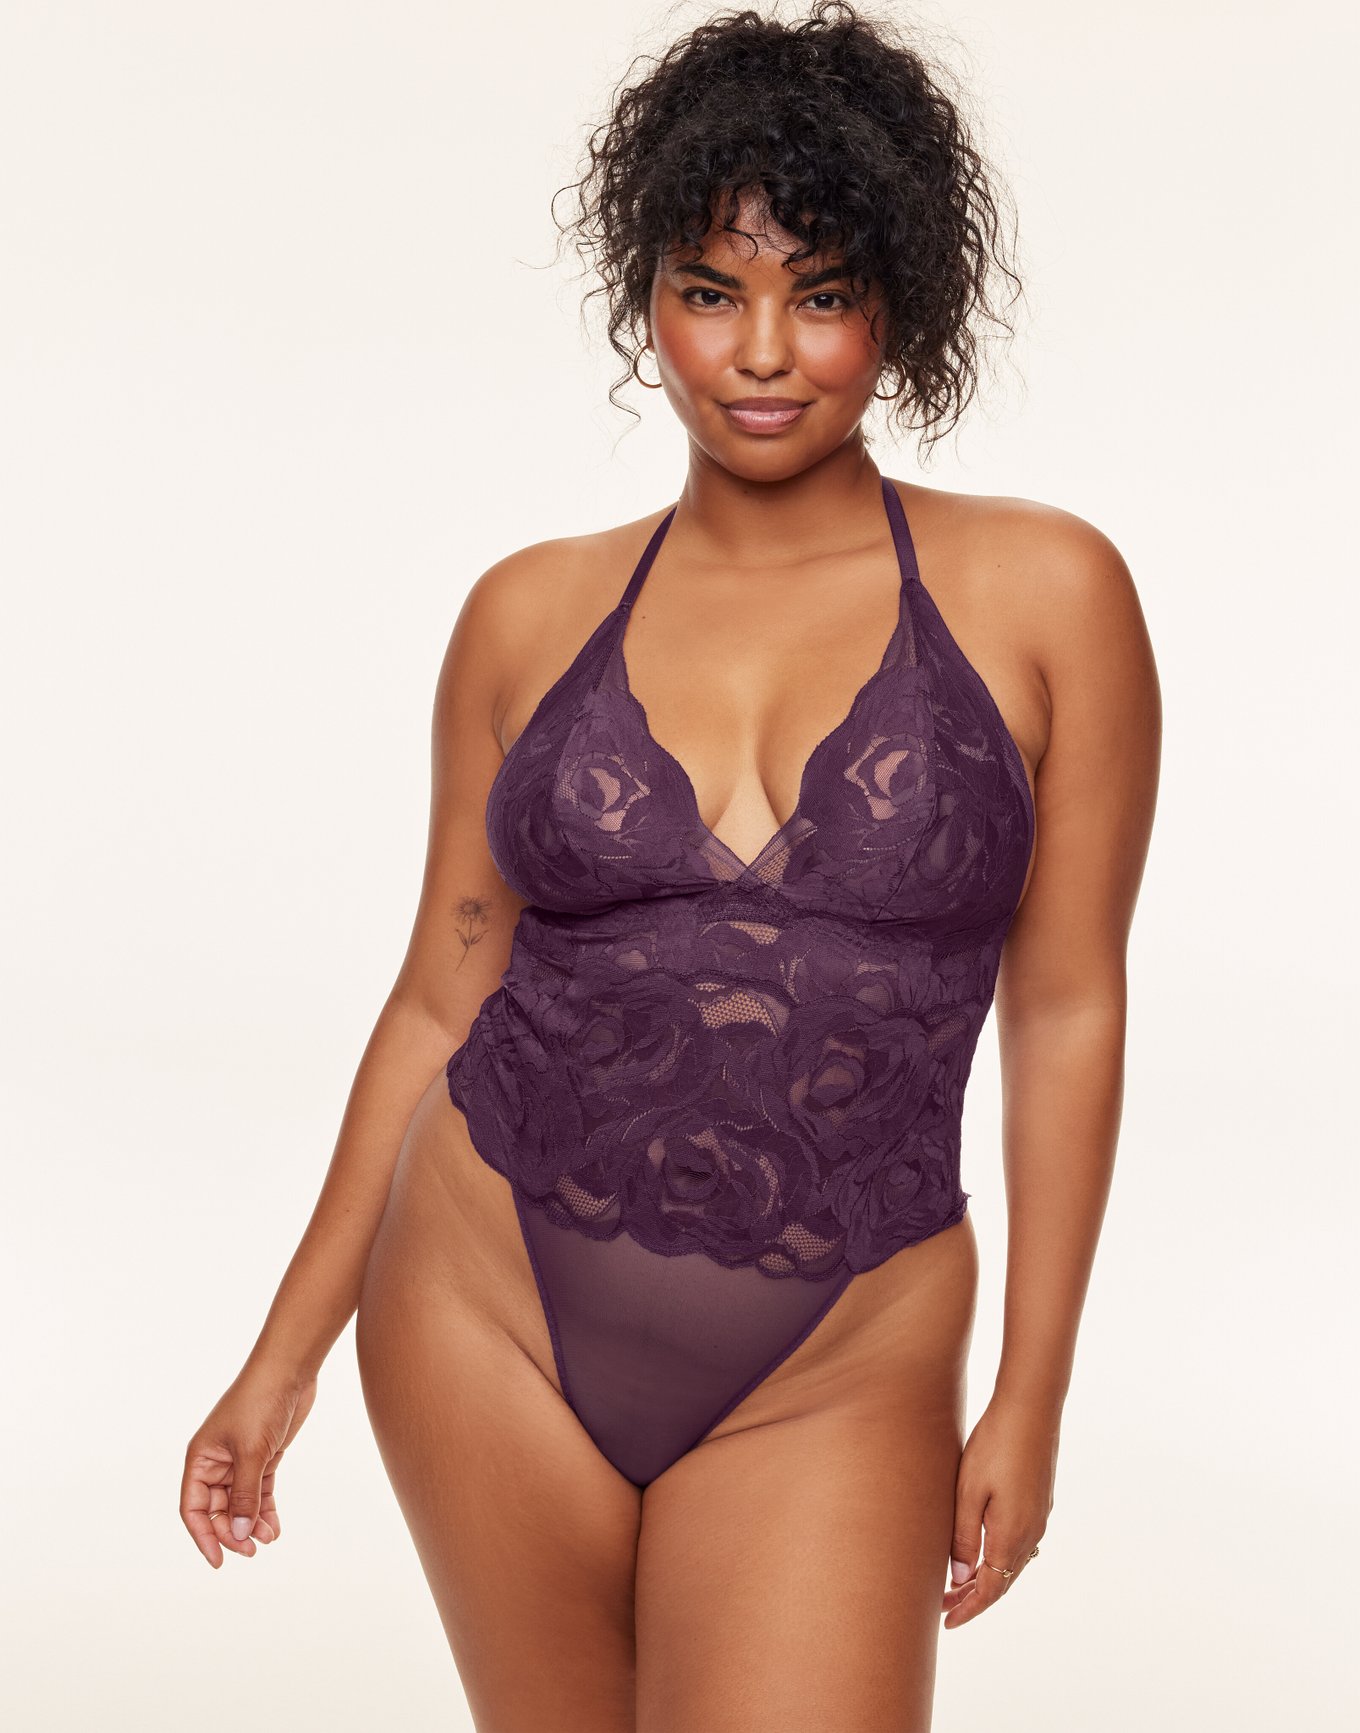 Plus Size VIP Wine Lace Sexy Strappy Teddy - Spicy Lingerie